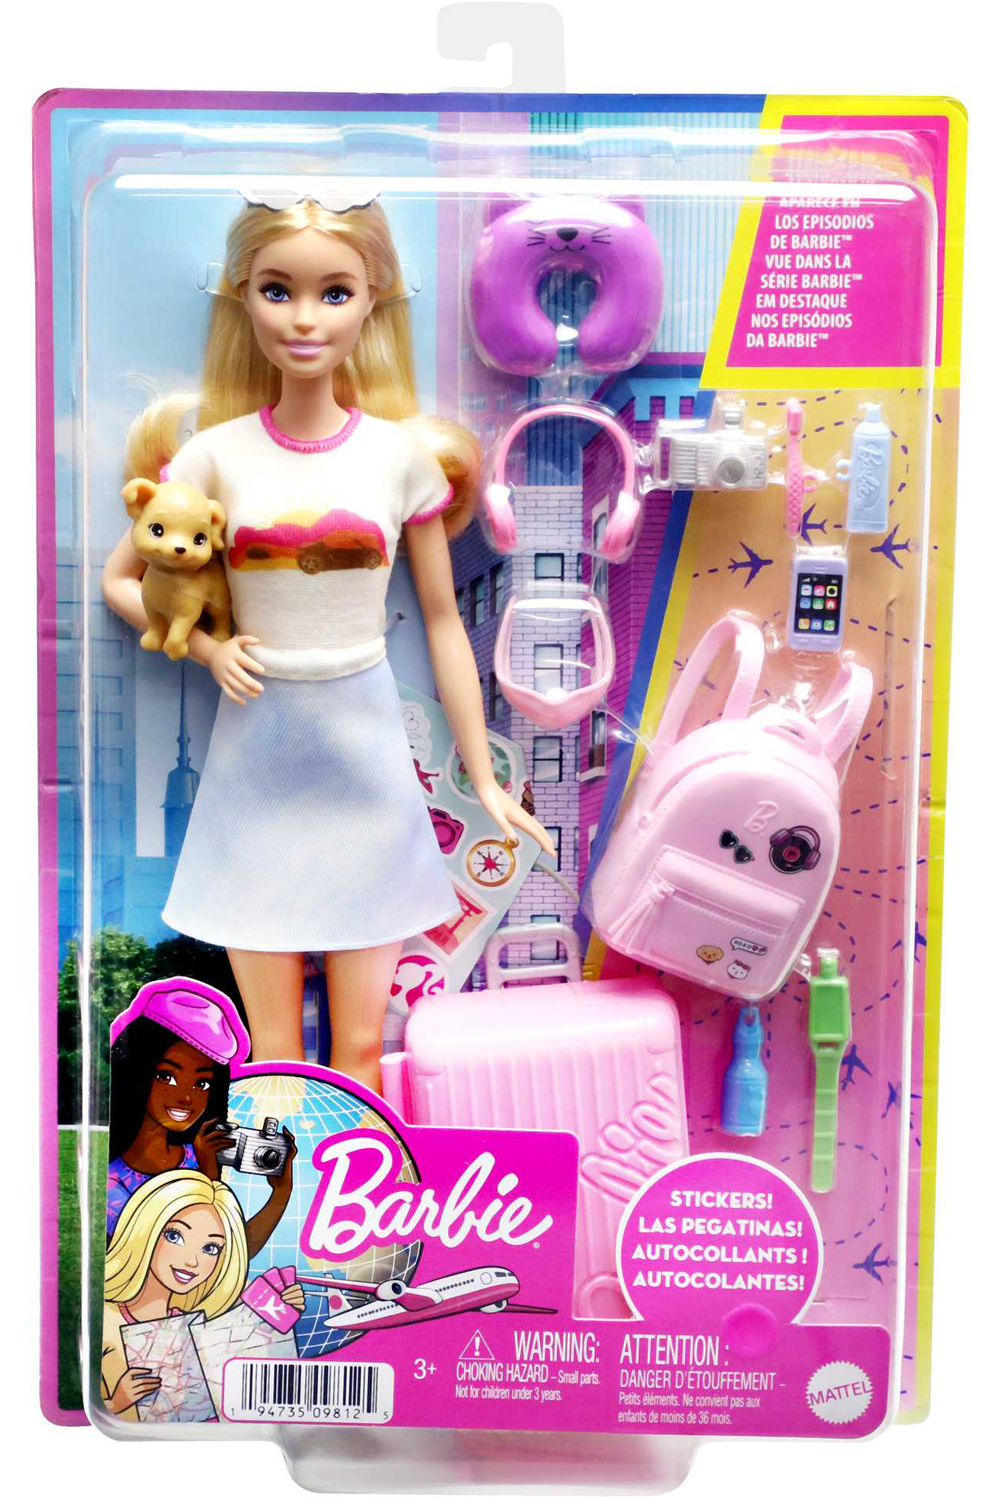 Barbie Doll And Accessories Travel Set | Whitcoulls